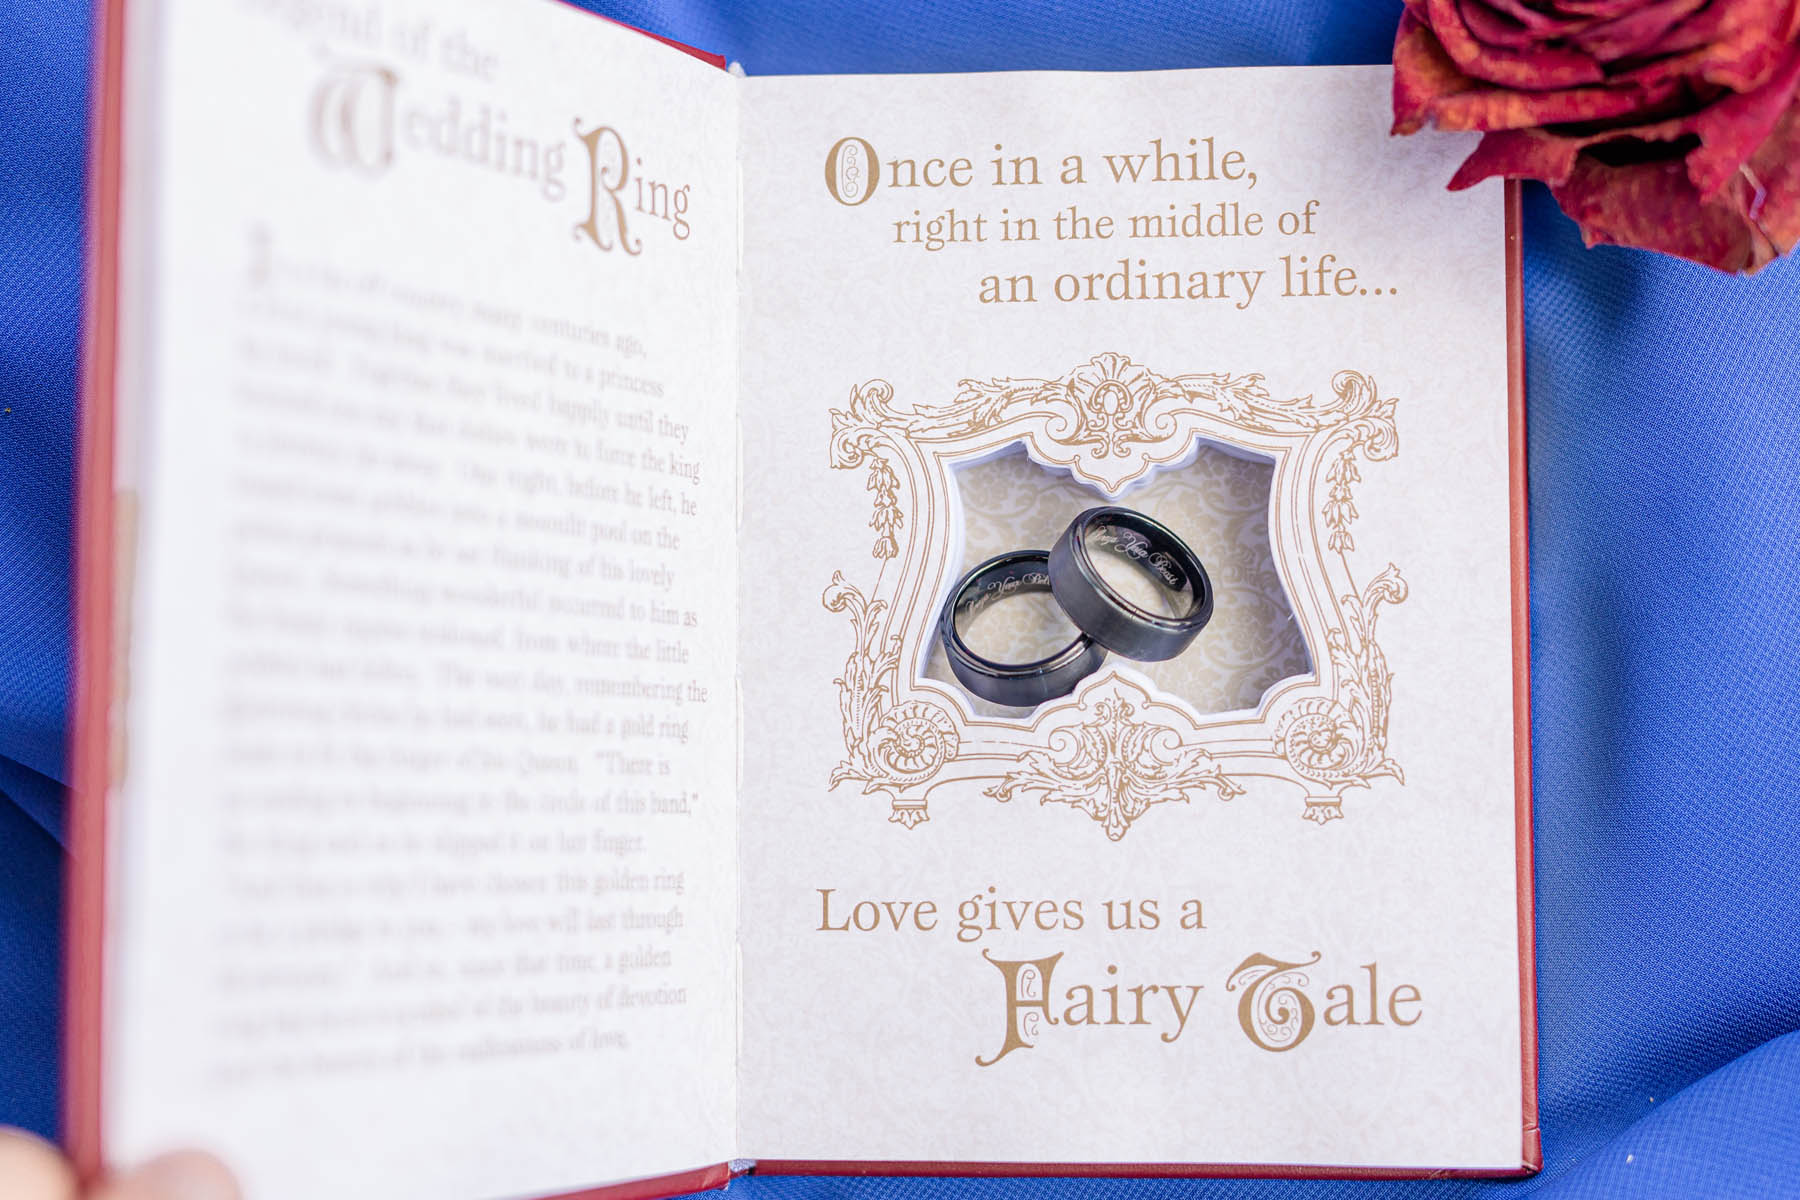 A hardcover book with two rings in the center of it. The text reads: Once in a while, right in the middle of an ordinary life... Love gives us a Fairy Tale.